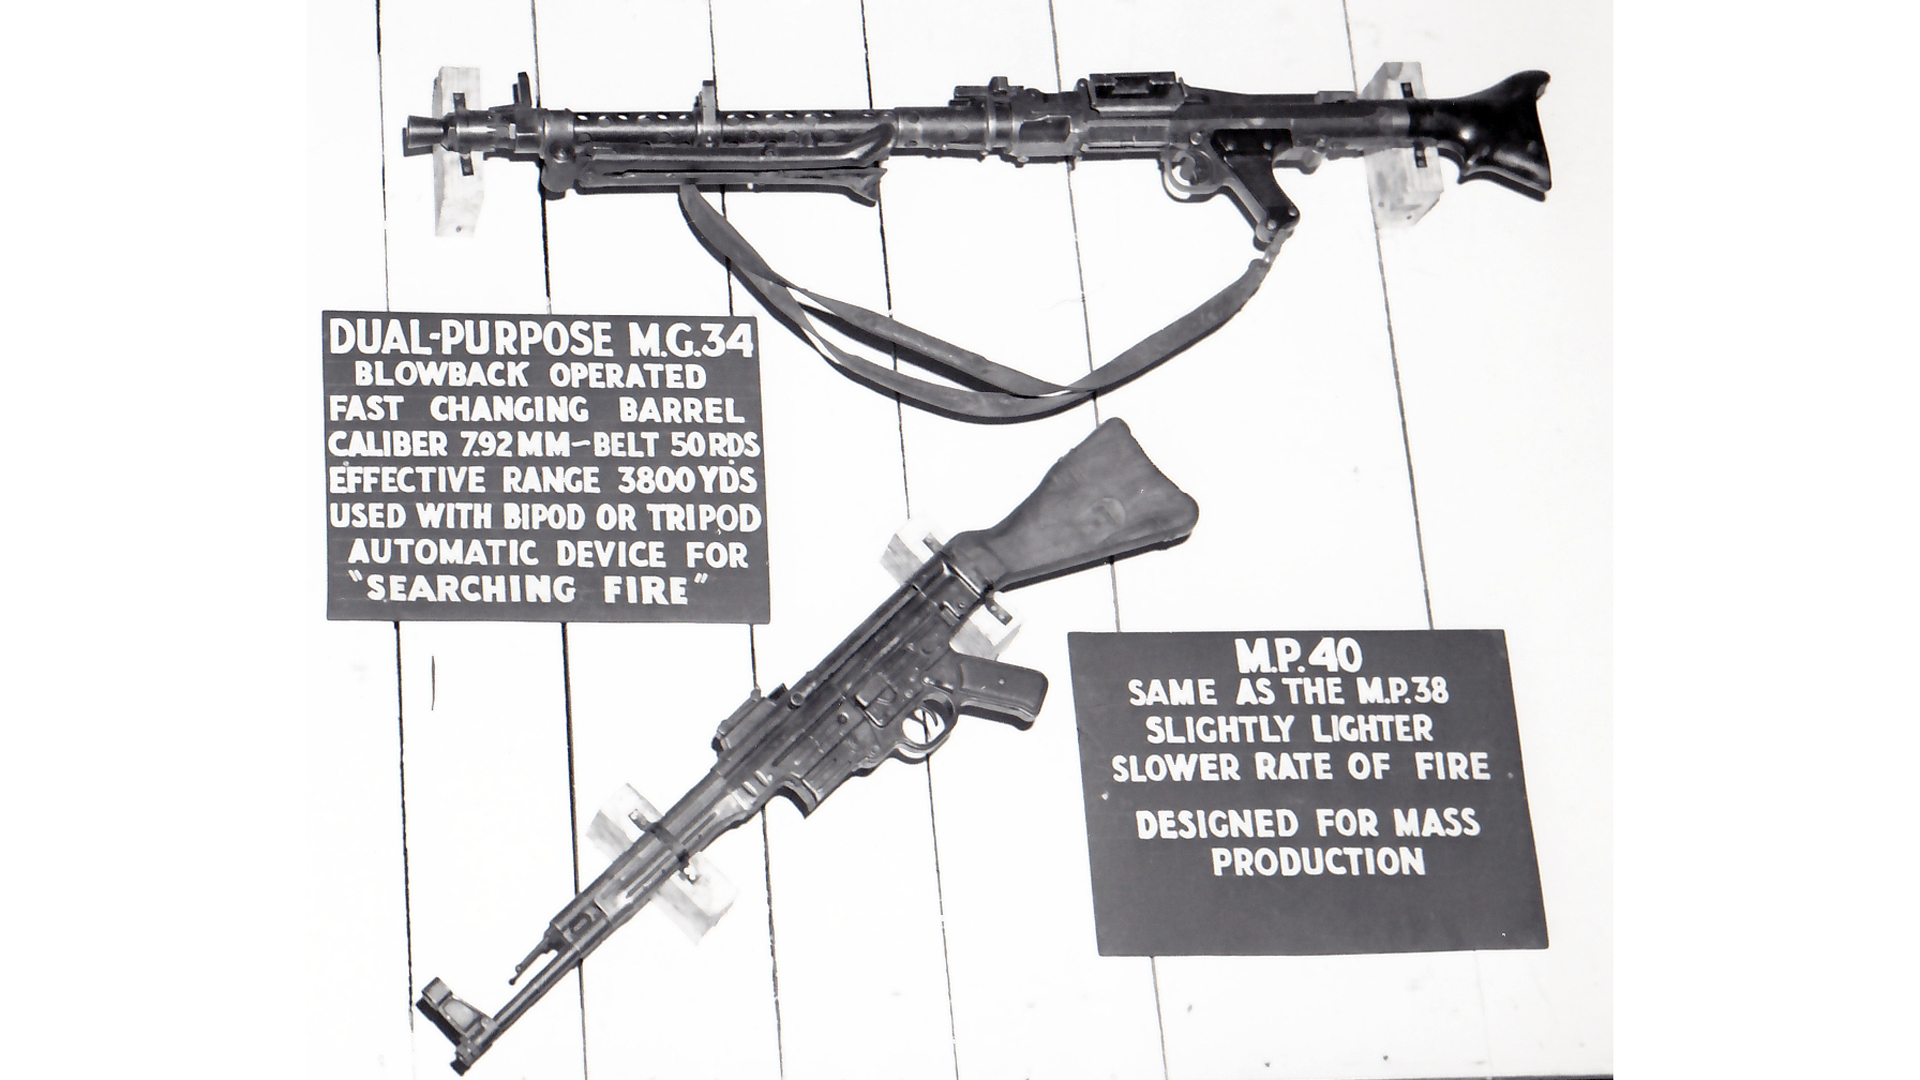 A German weapons display created by US troops in France during early 1945.  The error seen in the StG44 description confirms that wartime notions about German weapons were sometimes inaccurate.